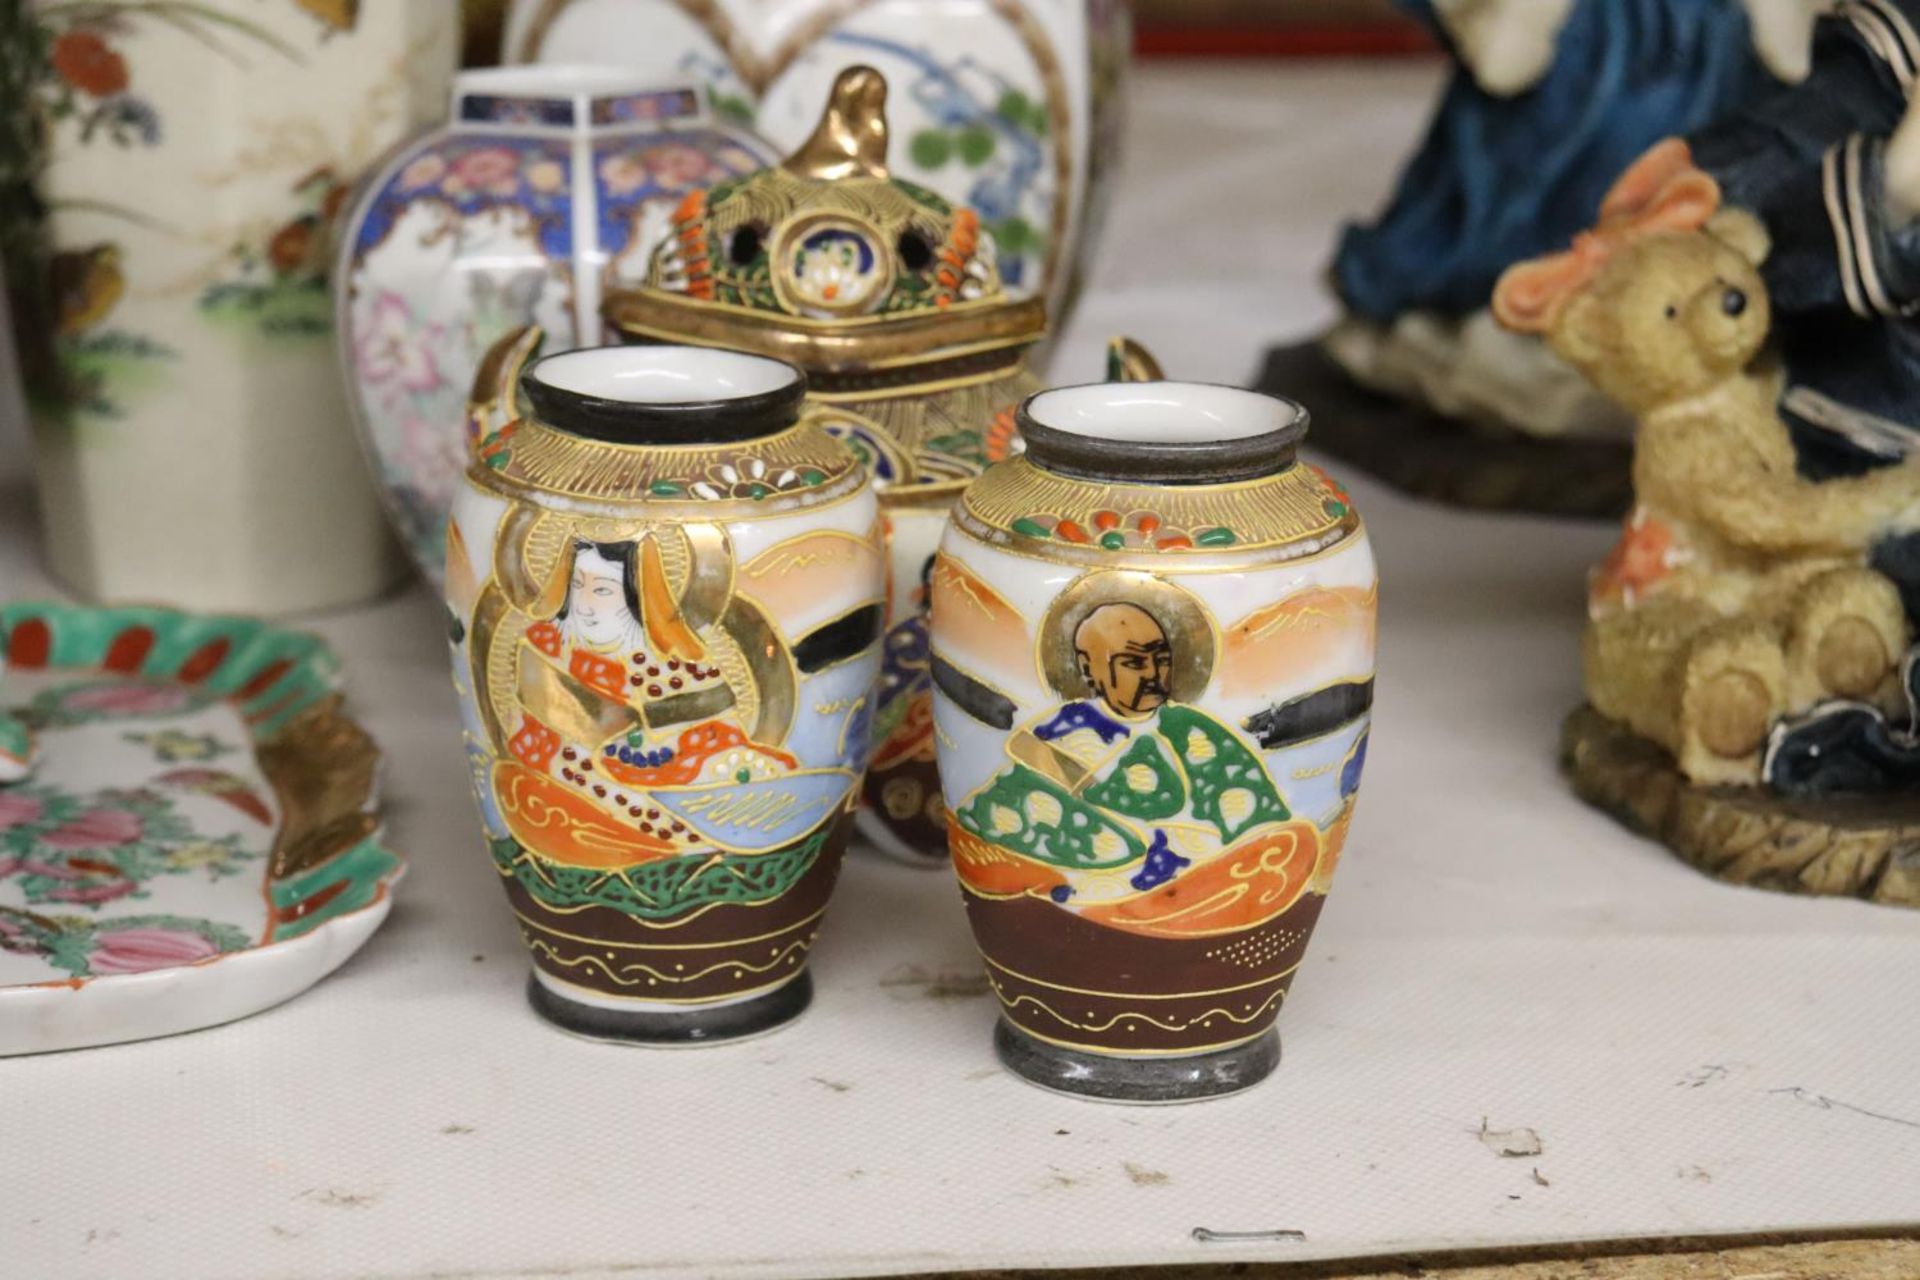 A QUANTITY OF ORIENTAL CERAMICS TO INCLUDE A HAND PAINTED VASE, CANDLE STICKS, TRINKET BOXES, ETC - Image 3 of 8